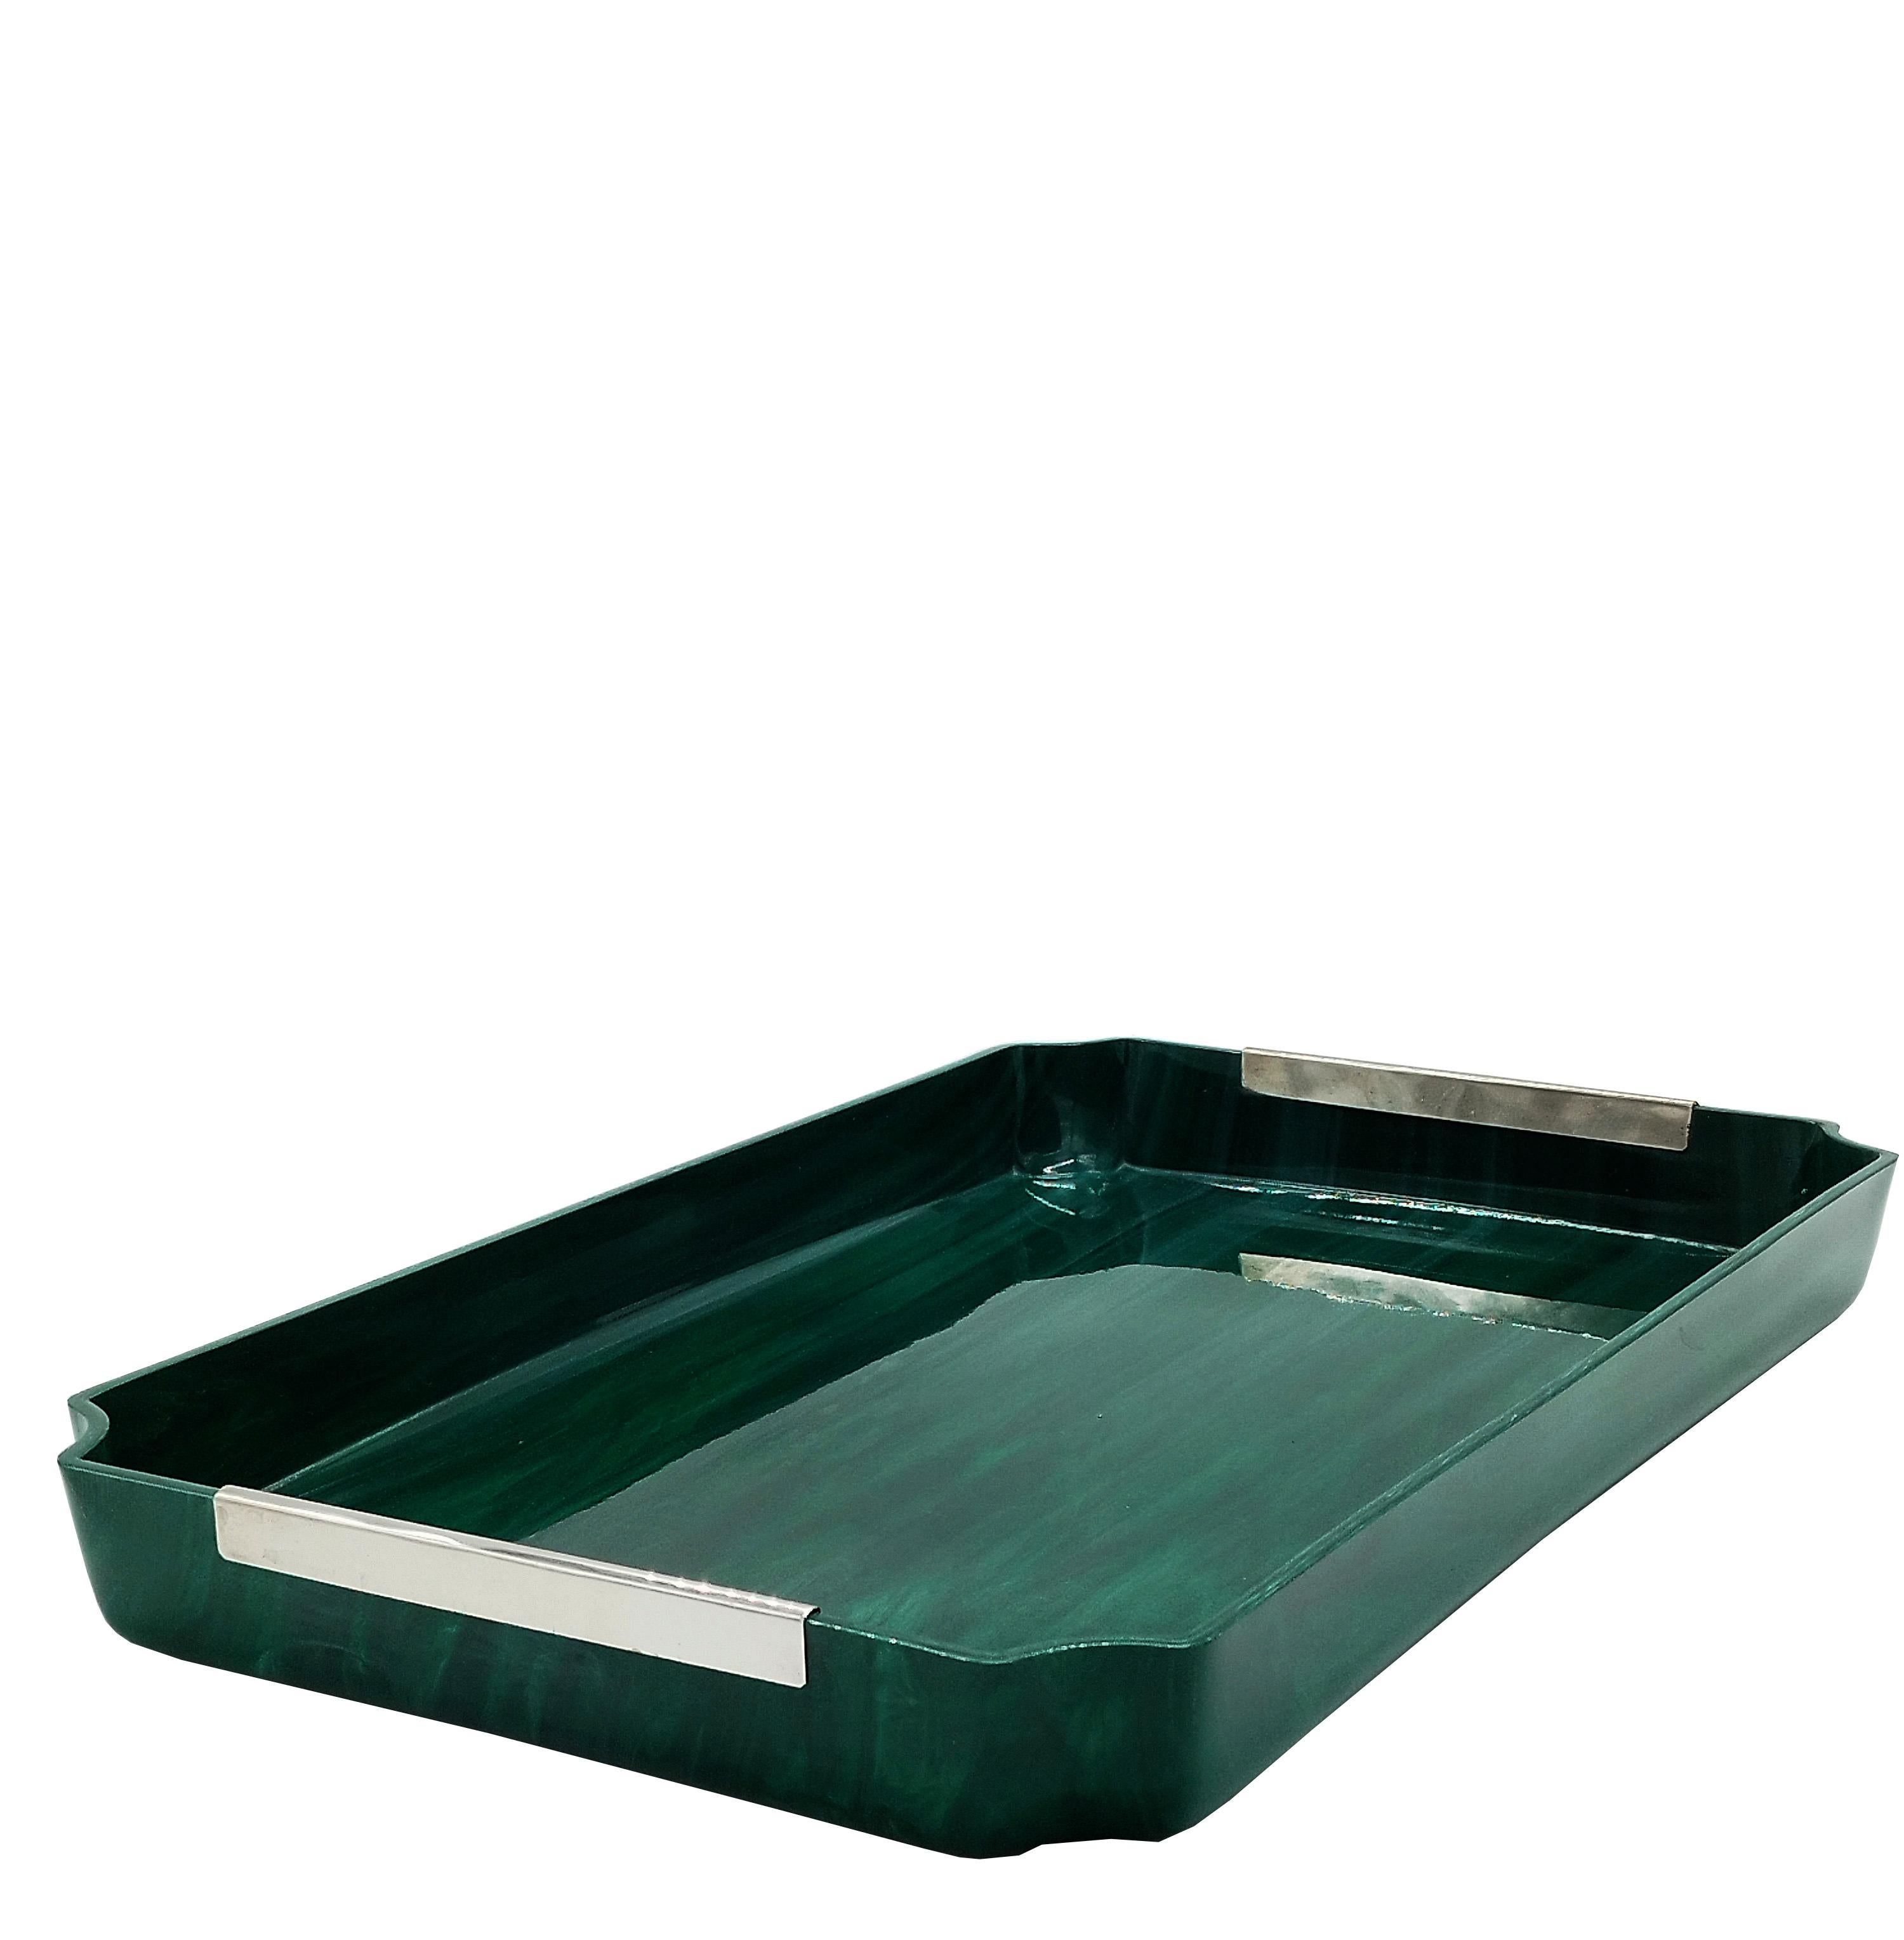 Rectangular serving tray in faux malachite acrylic and chrome-plated metal, Italian production 1970.